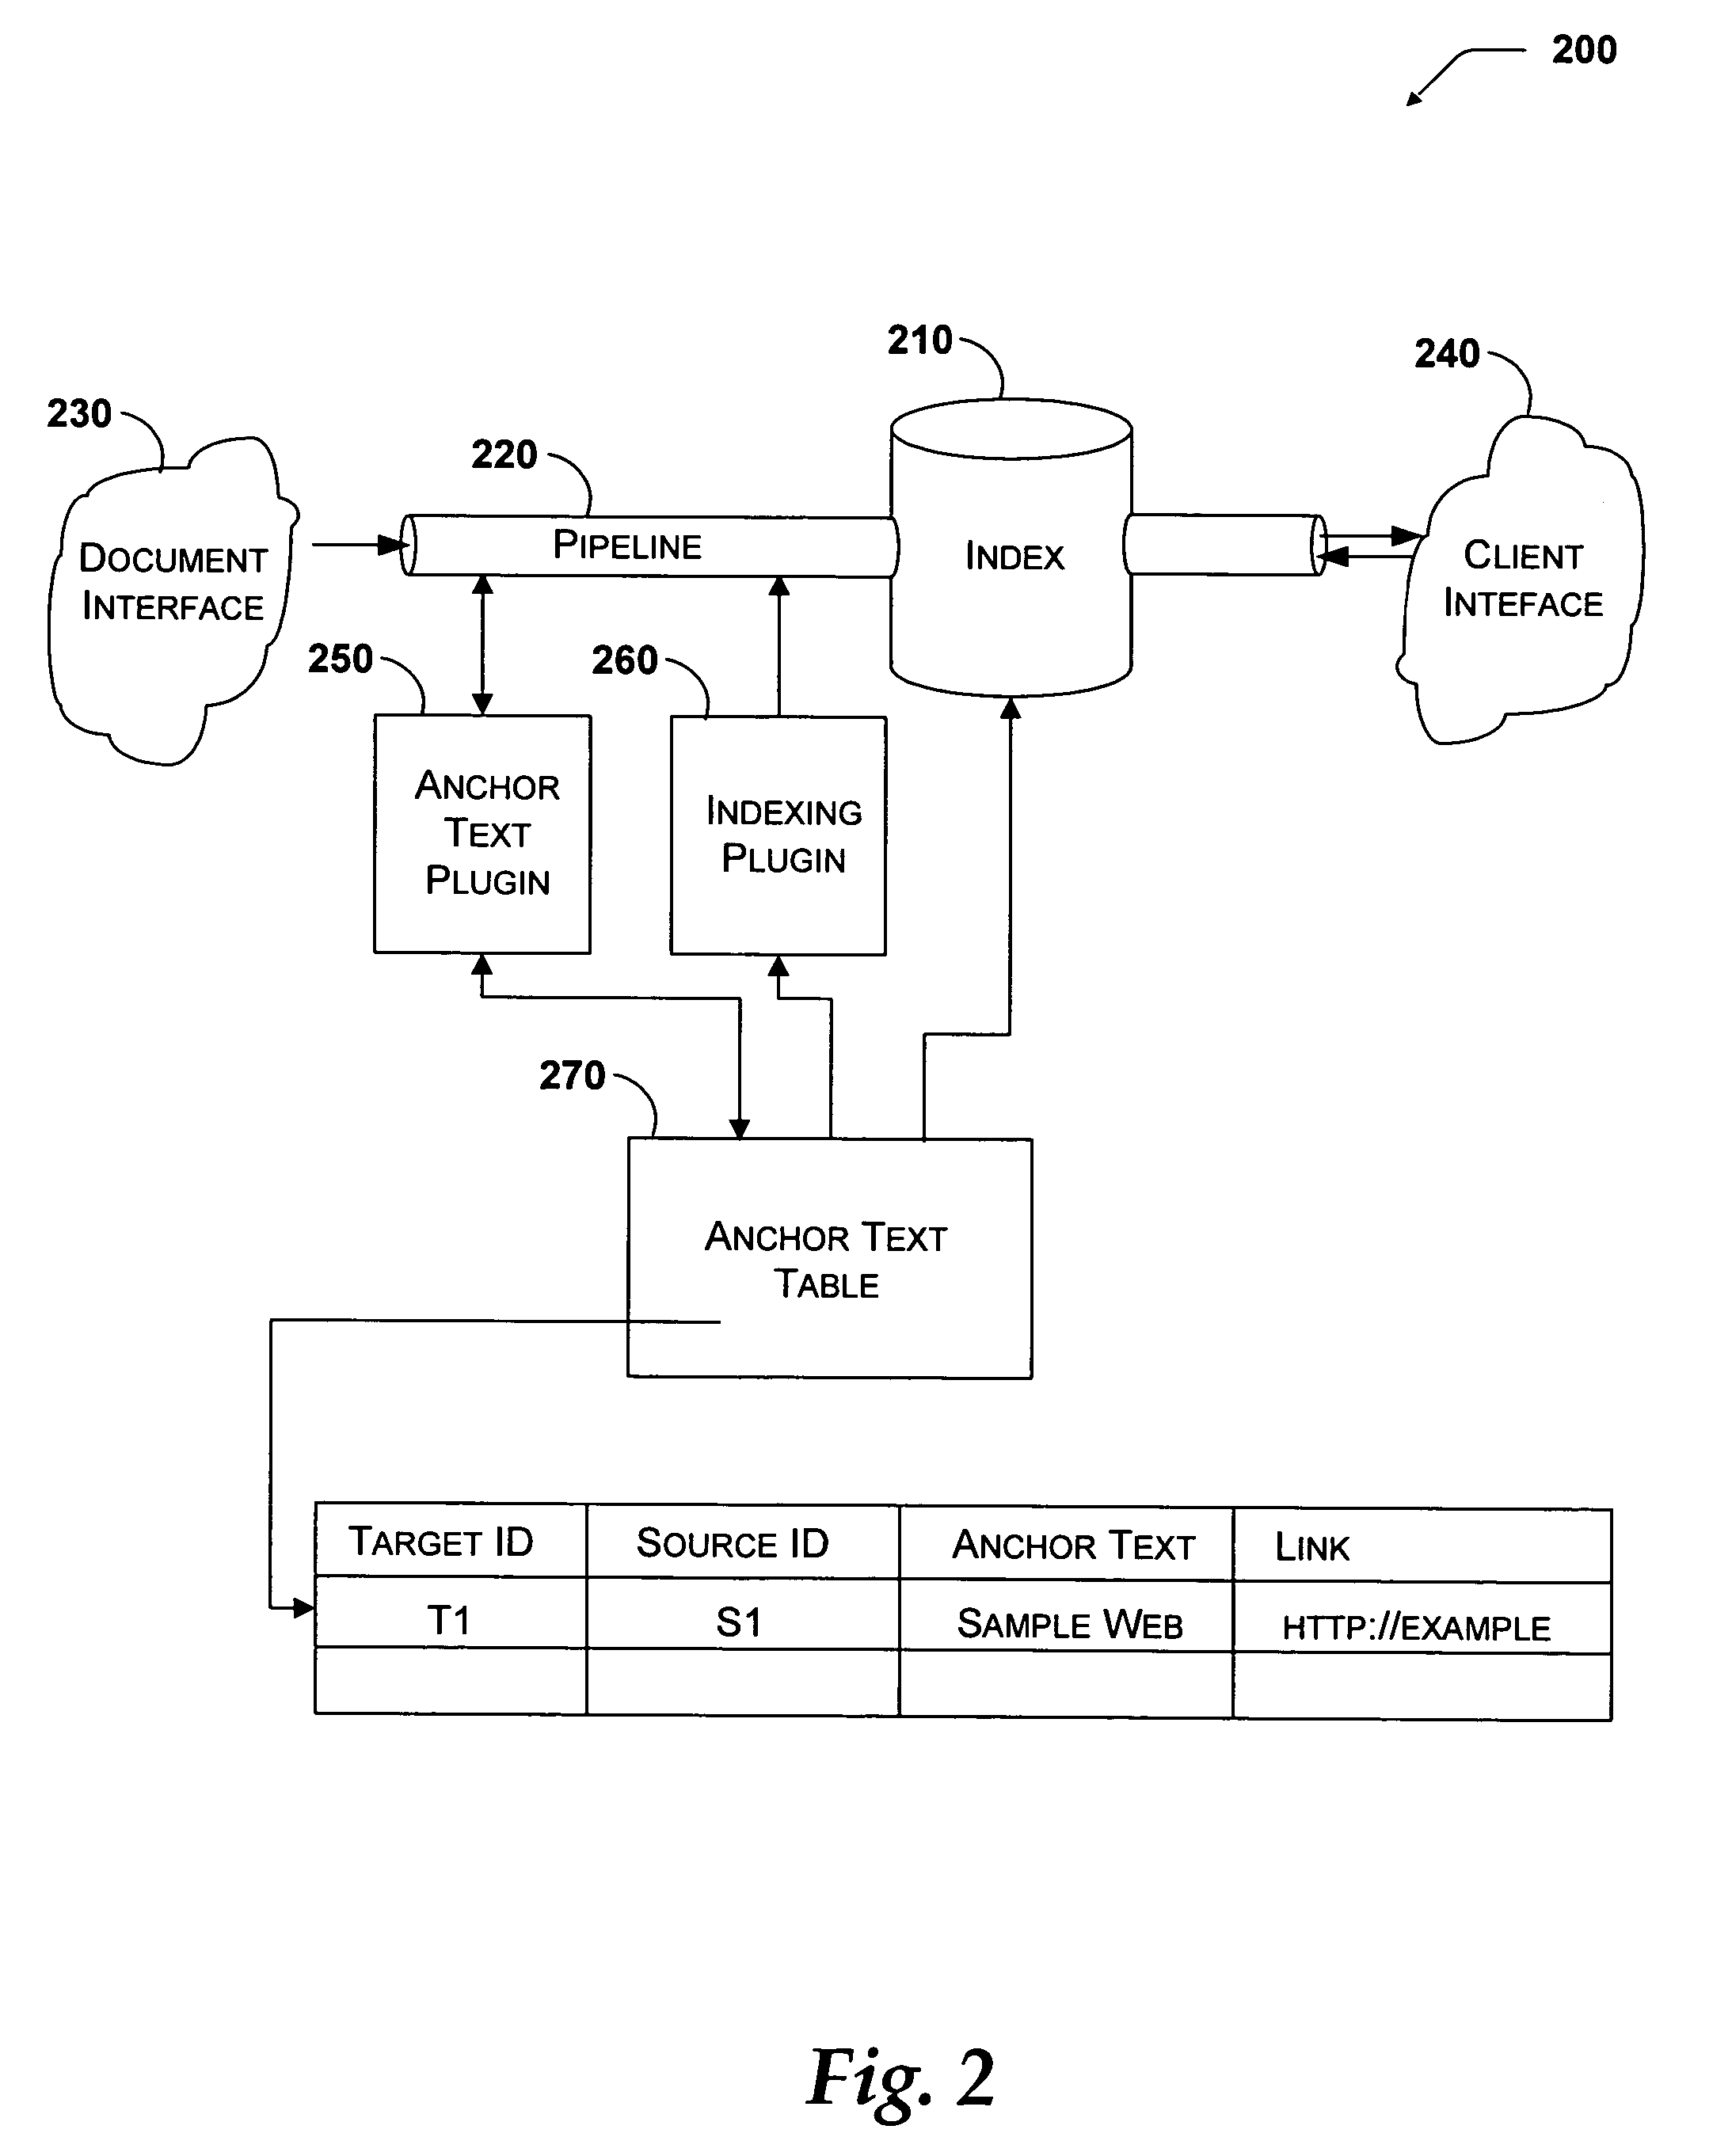 System and method for incorporating anchor text into ranking search results